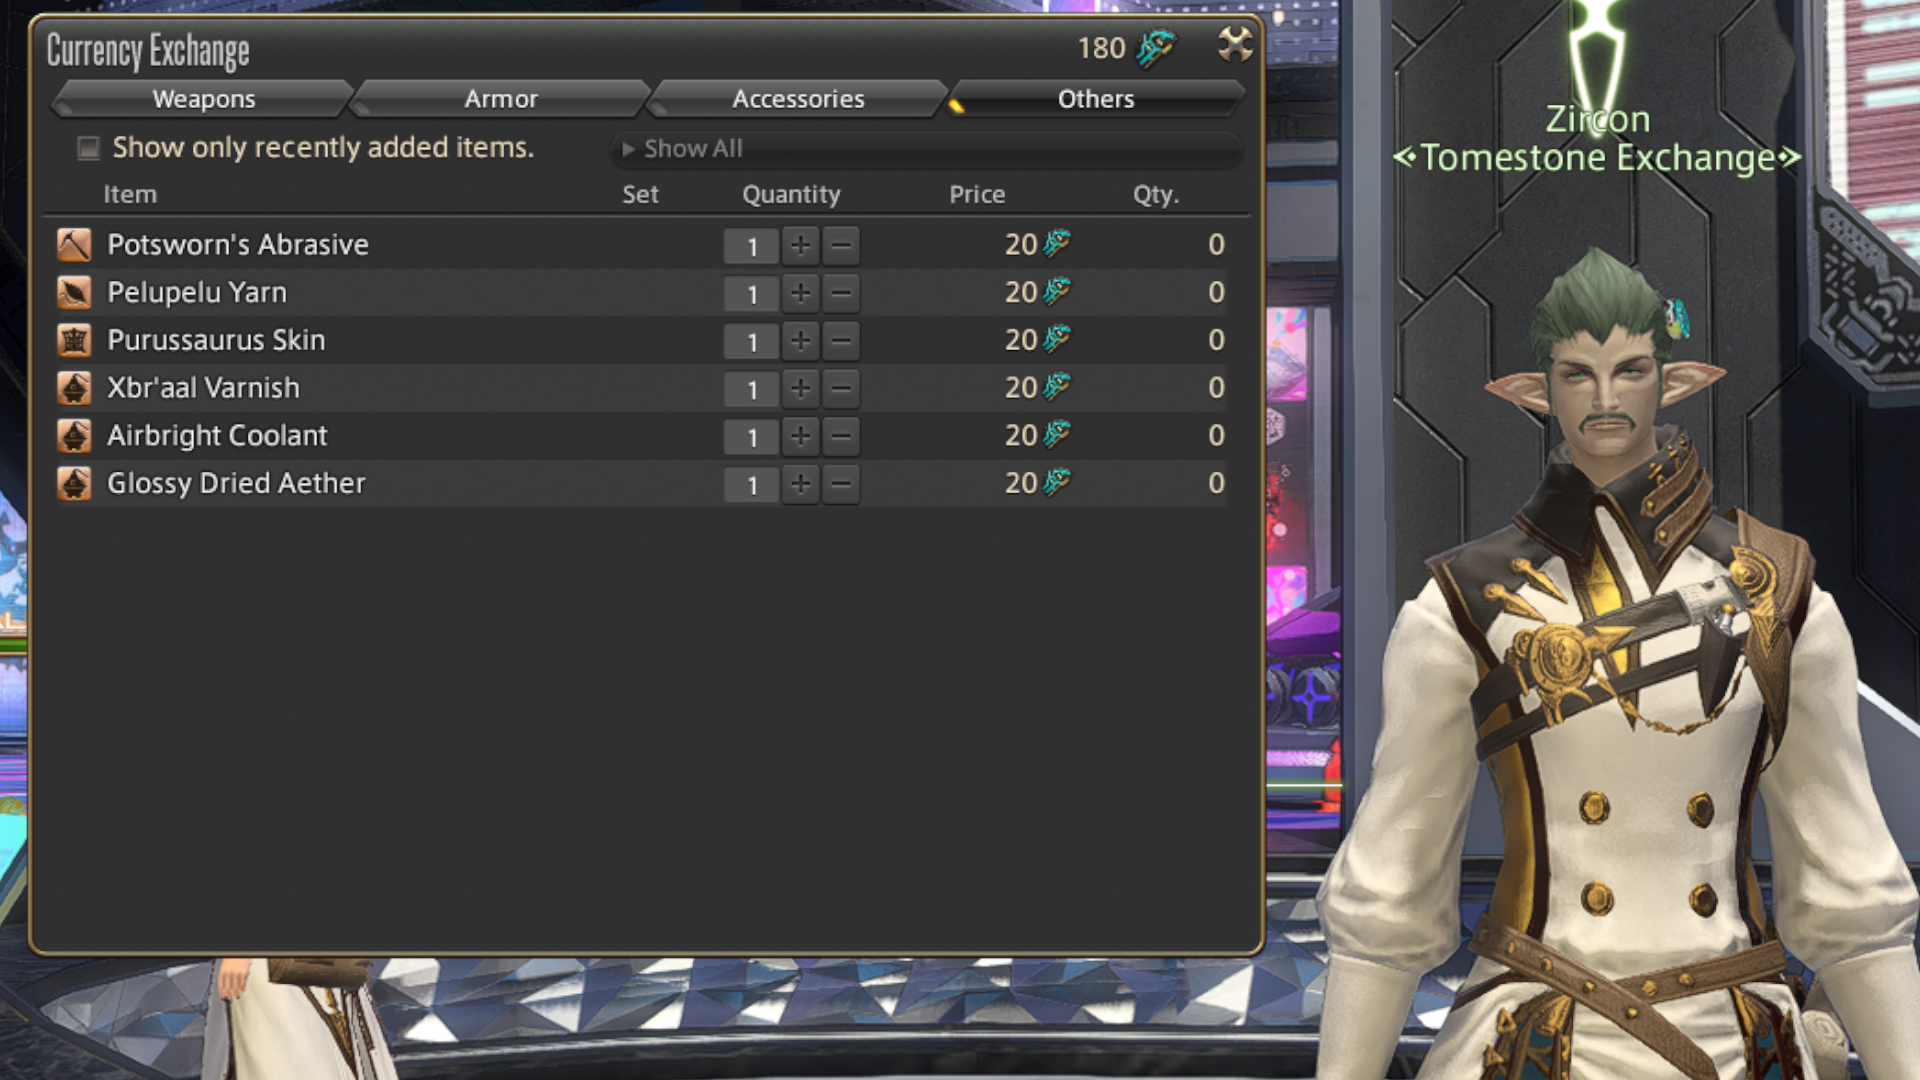 Zircon, a vendor in Final Fantasy 14, offers the player a wide selection of items to help them craft Archeo Kingdom items.